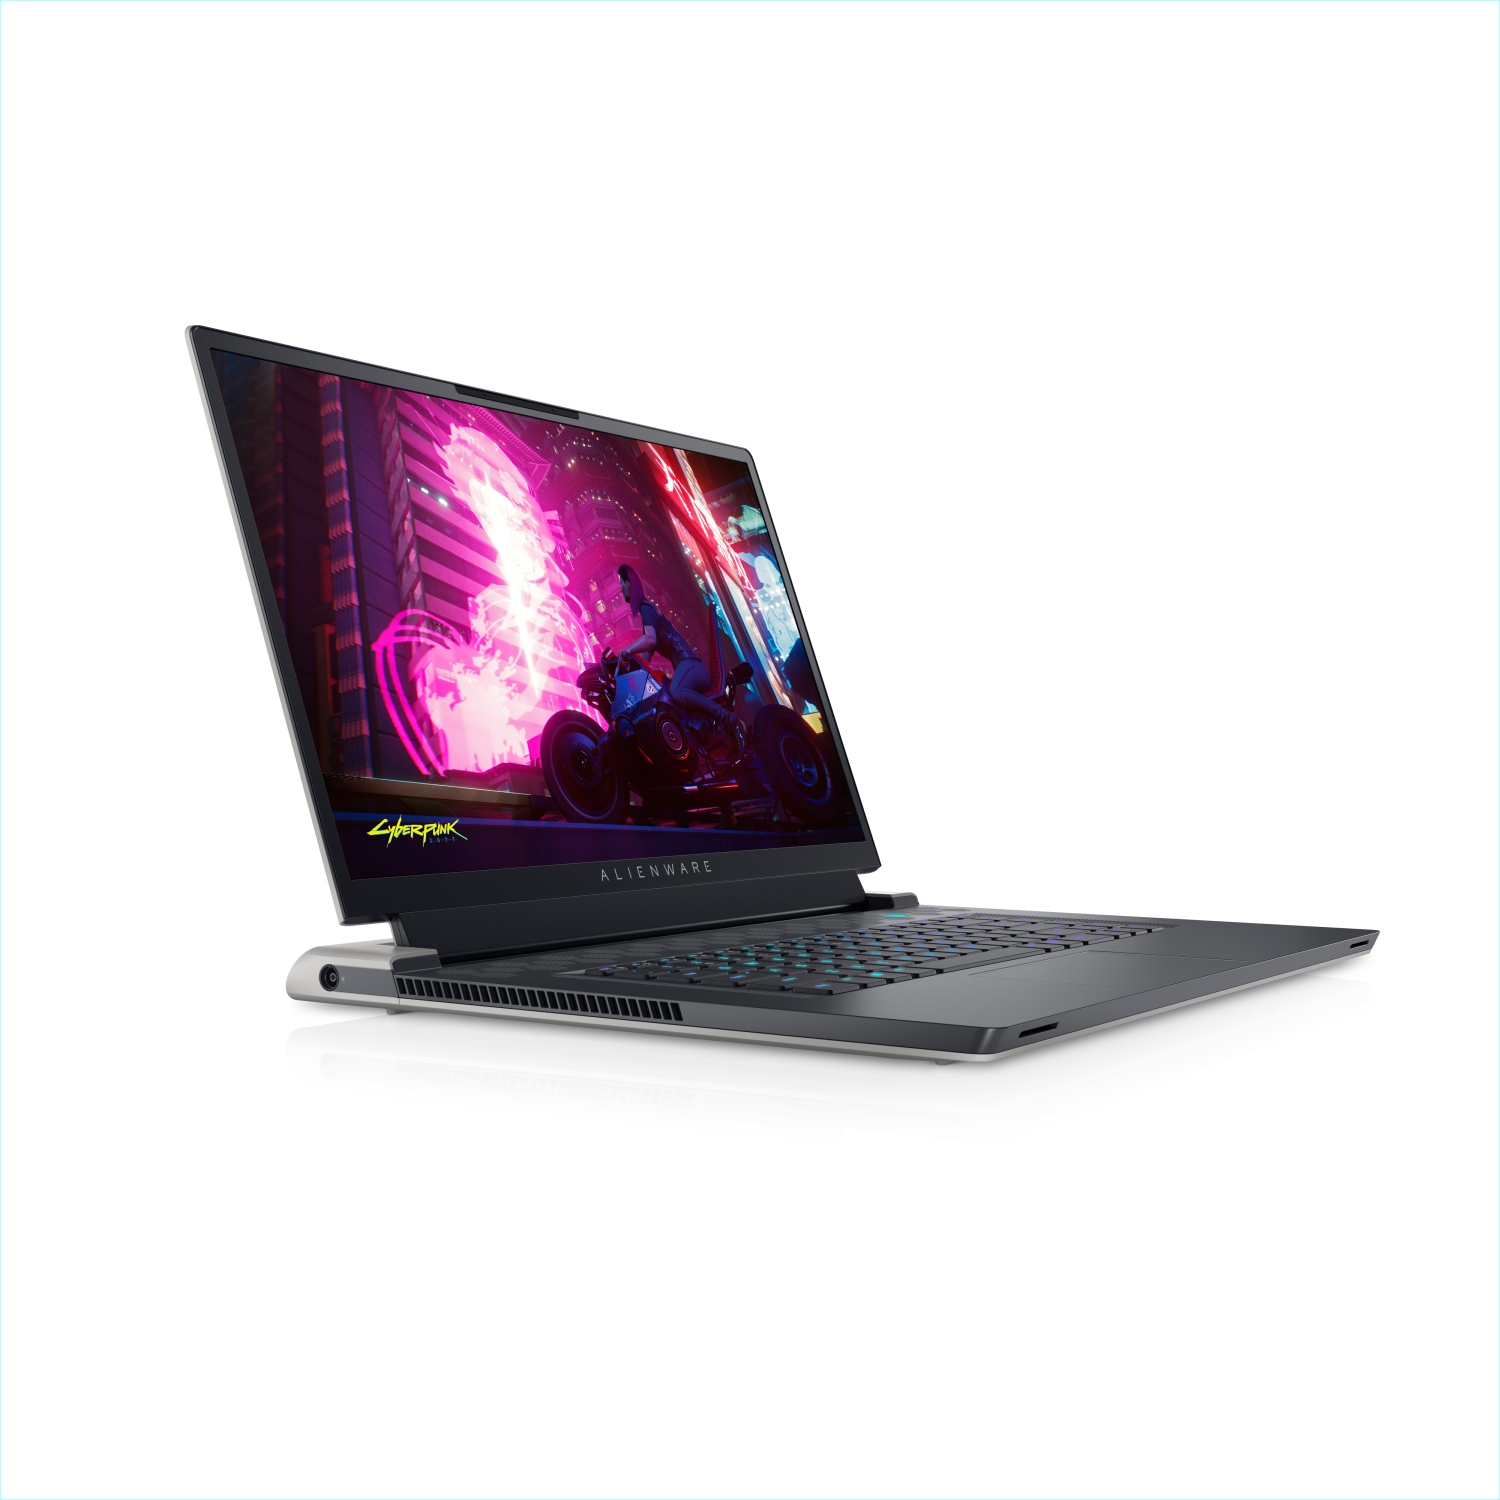 Refurbished (Excellent) – Dell Alienware X17 R1 Gaming Laptop (2021) | 17.3" FHD | Core i7 - 2TB SSD + 2TB SSD - 32GB RAM - RTX 3070 | 8 Cores @ 4.6 GHz - 11th Gen CPU - 8GB GDDR6